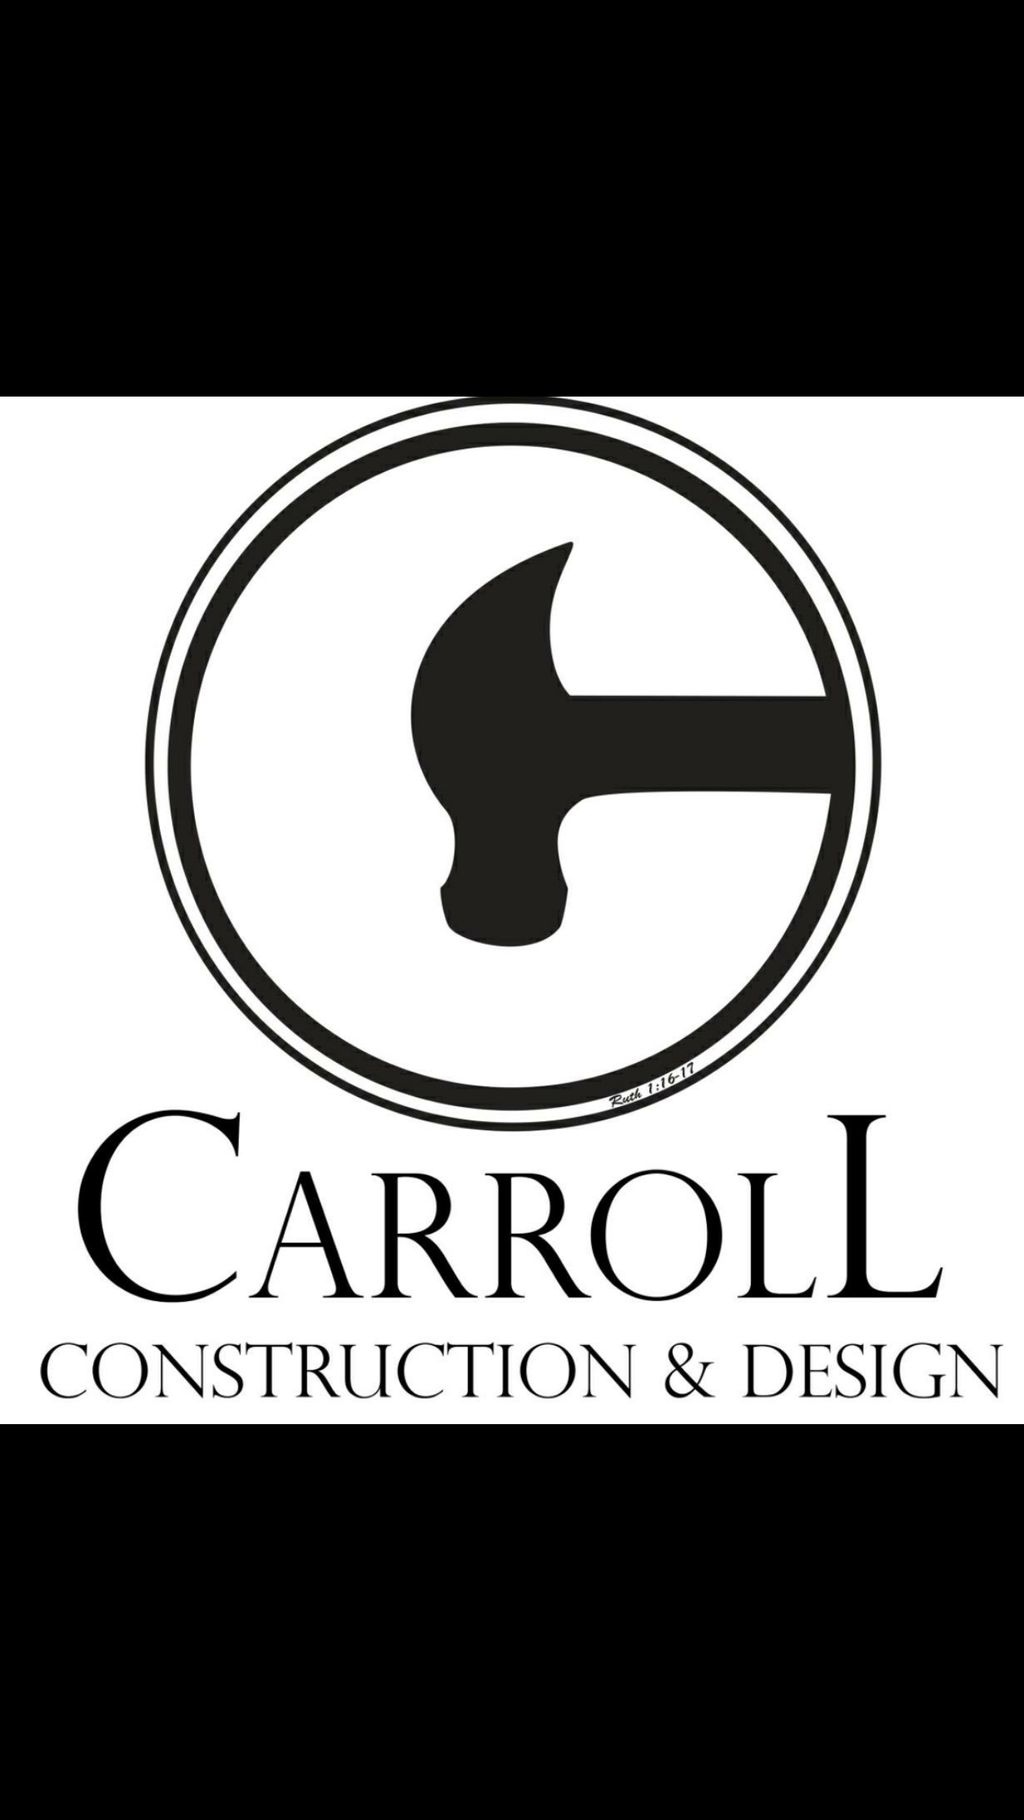 Carroll Construction and Design